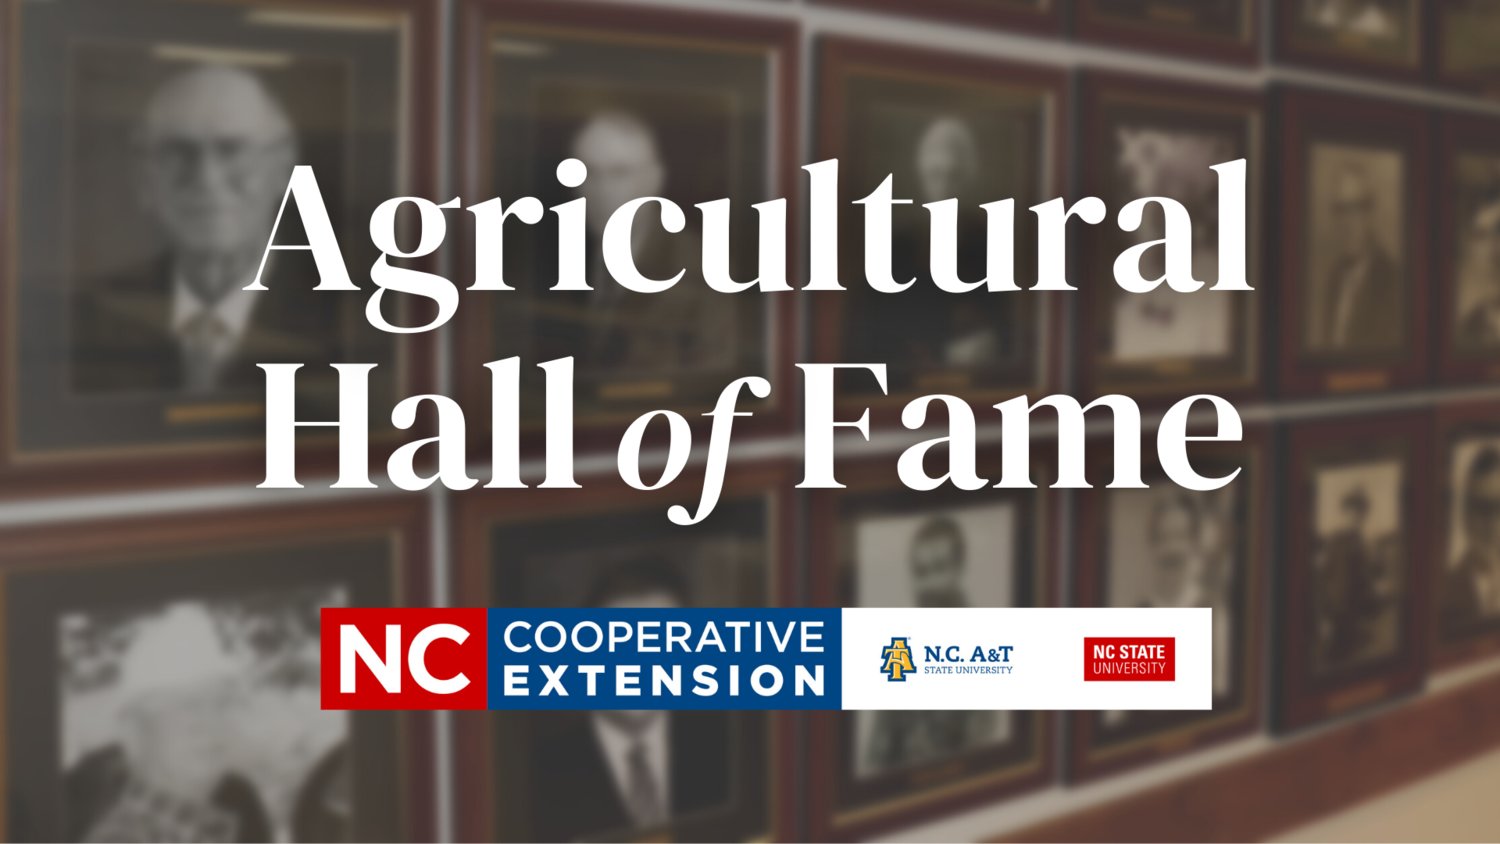 This year's Agricultural Hall of Fame inductee is Joseph (Joe) H. Gillis with Jessica Gillis Lee, 2023 Cumberland County Outstanding Young Farmer, also being recognized.